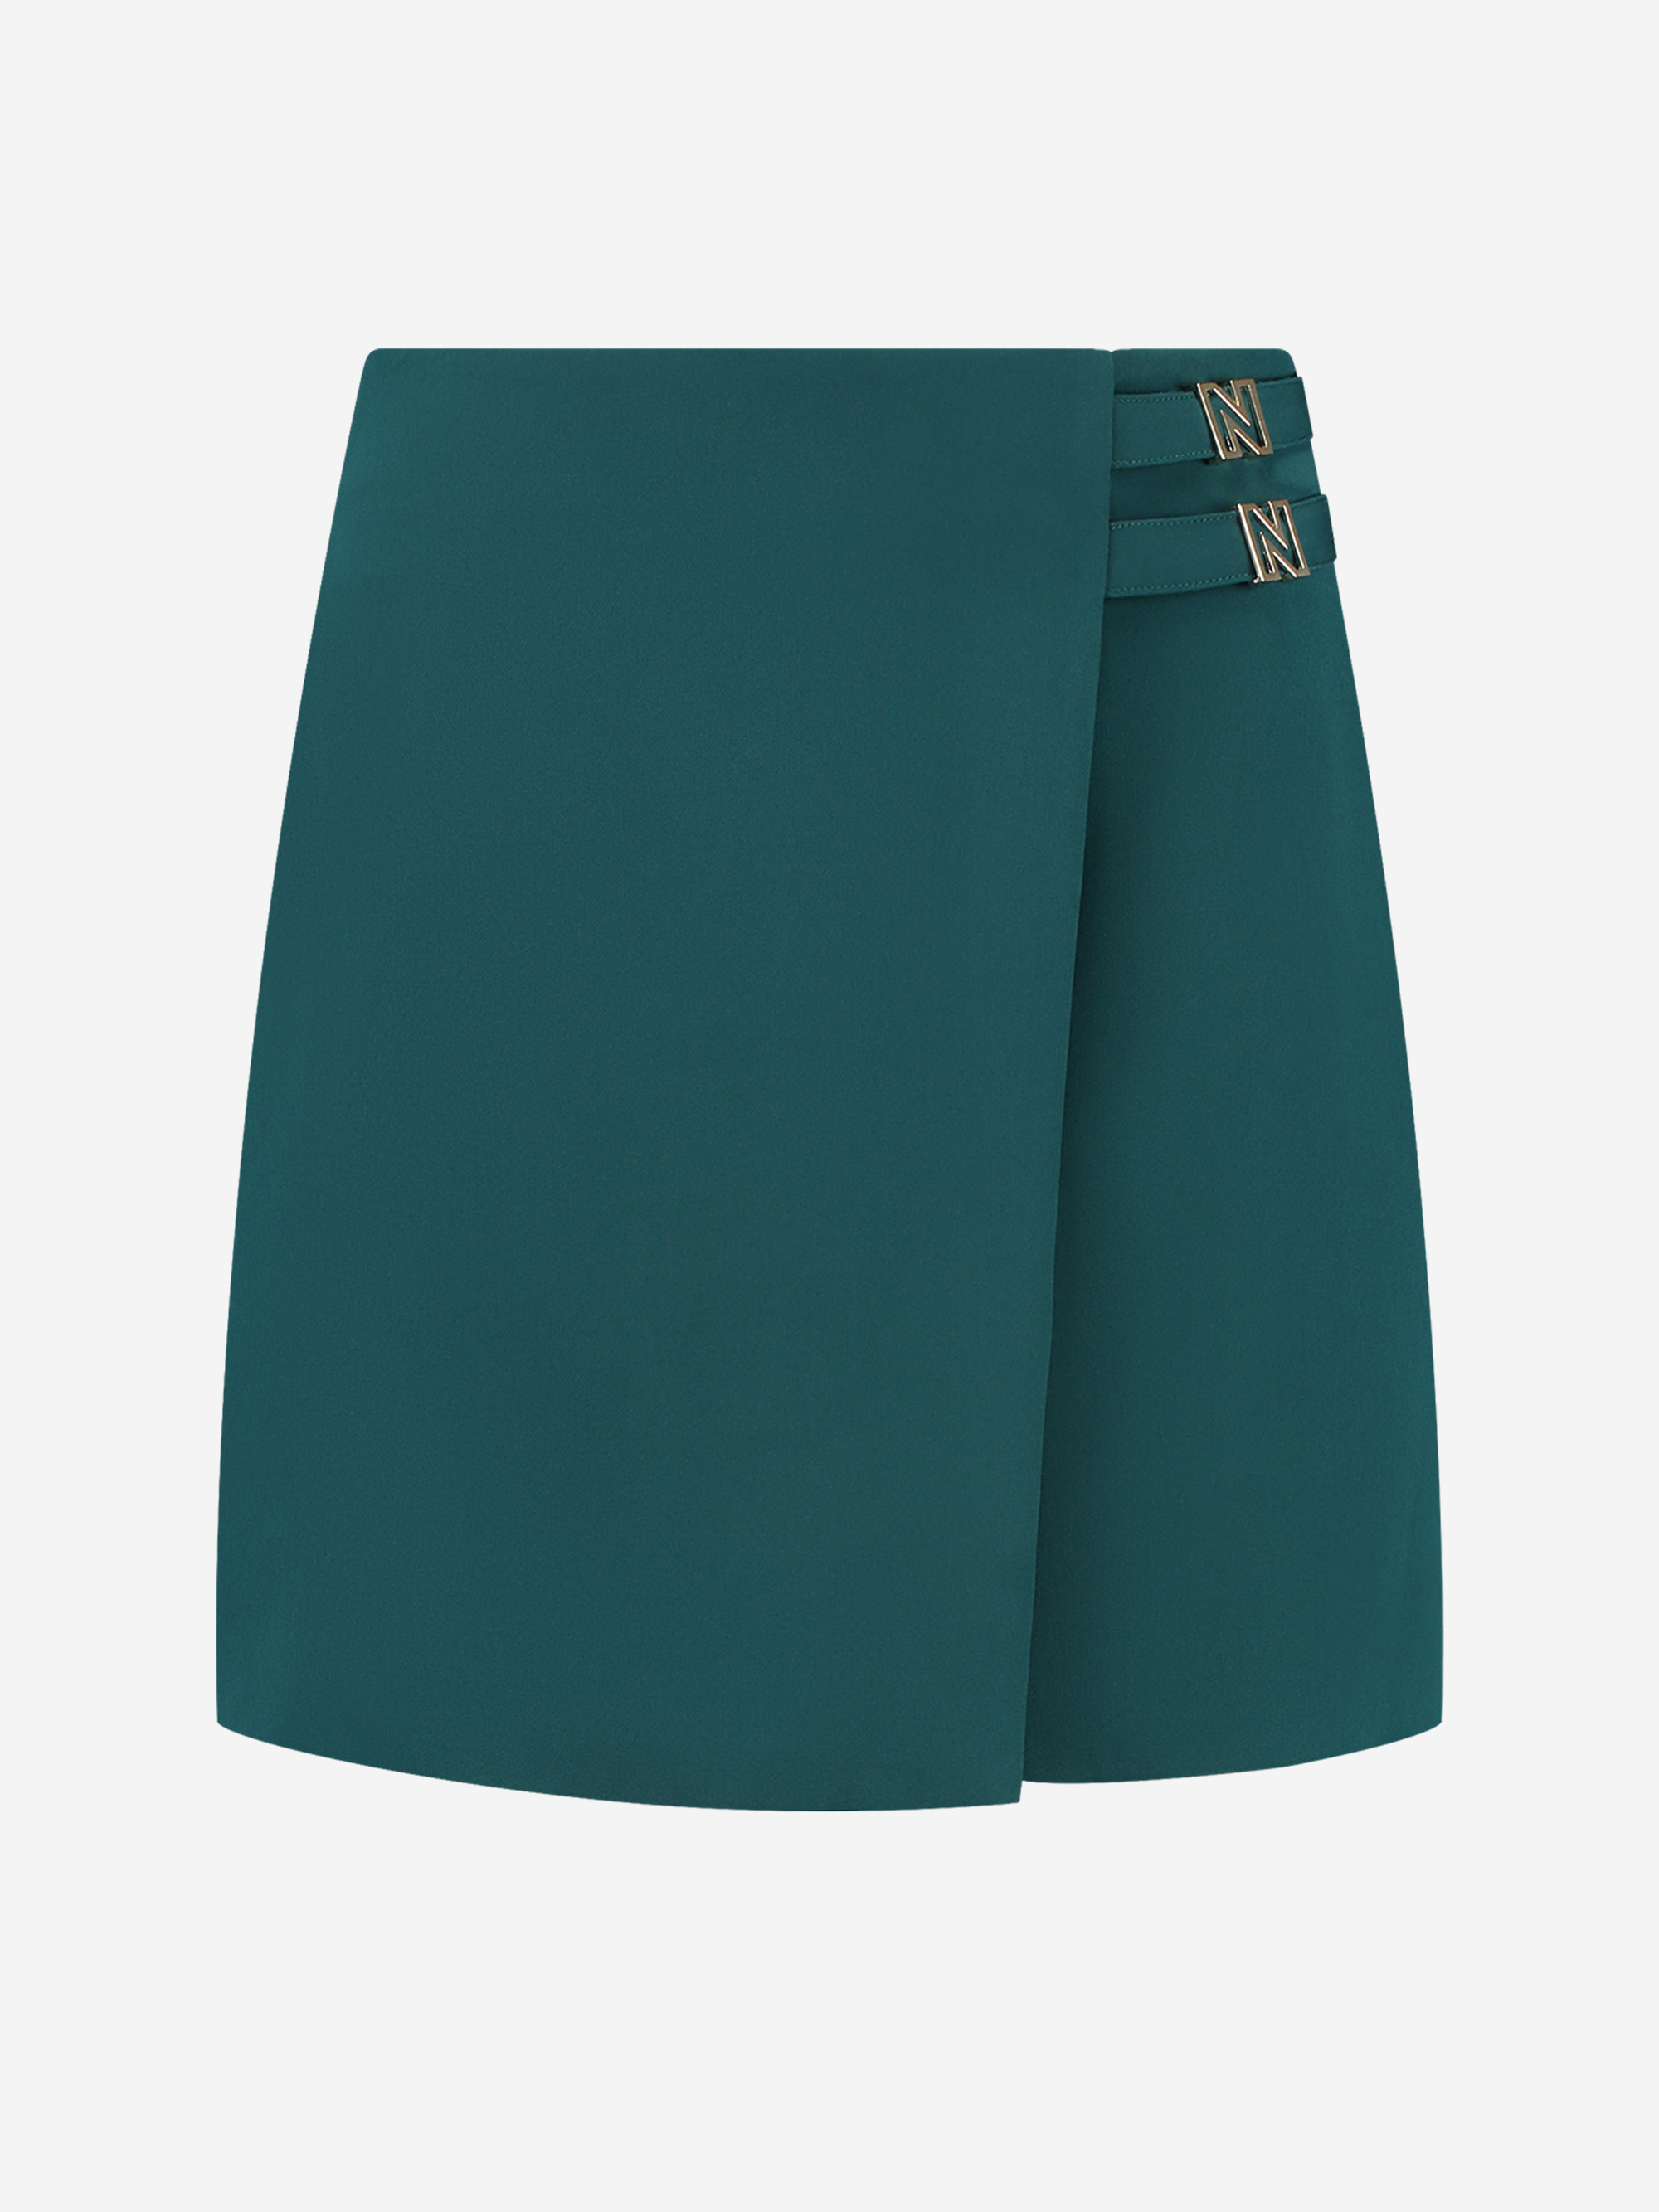 Skirt with A-line